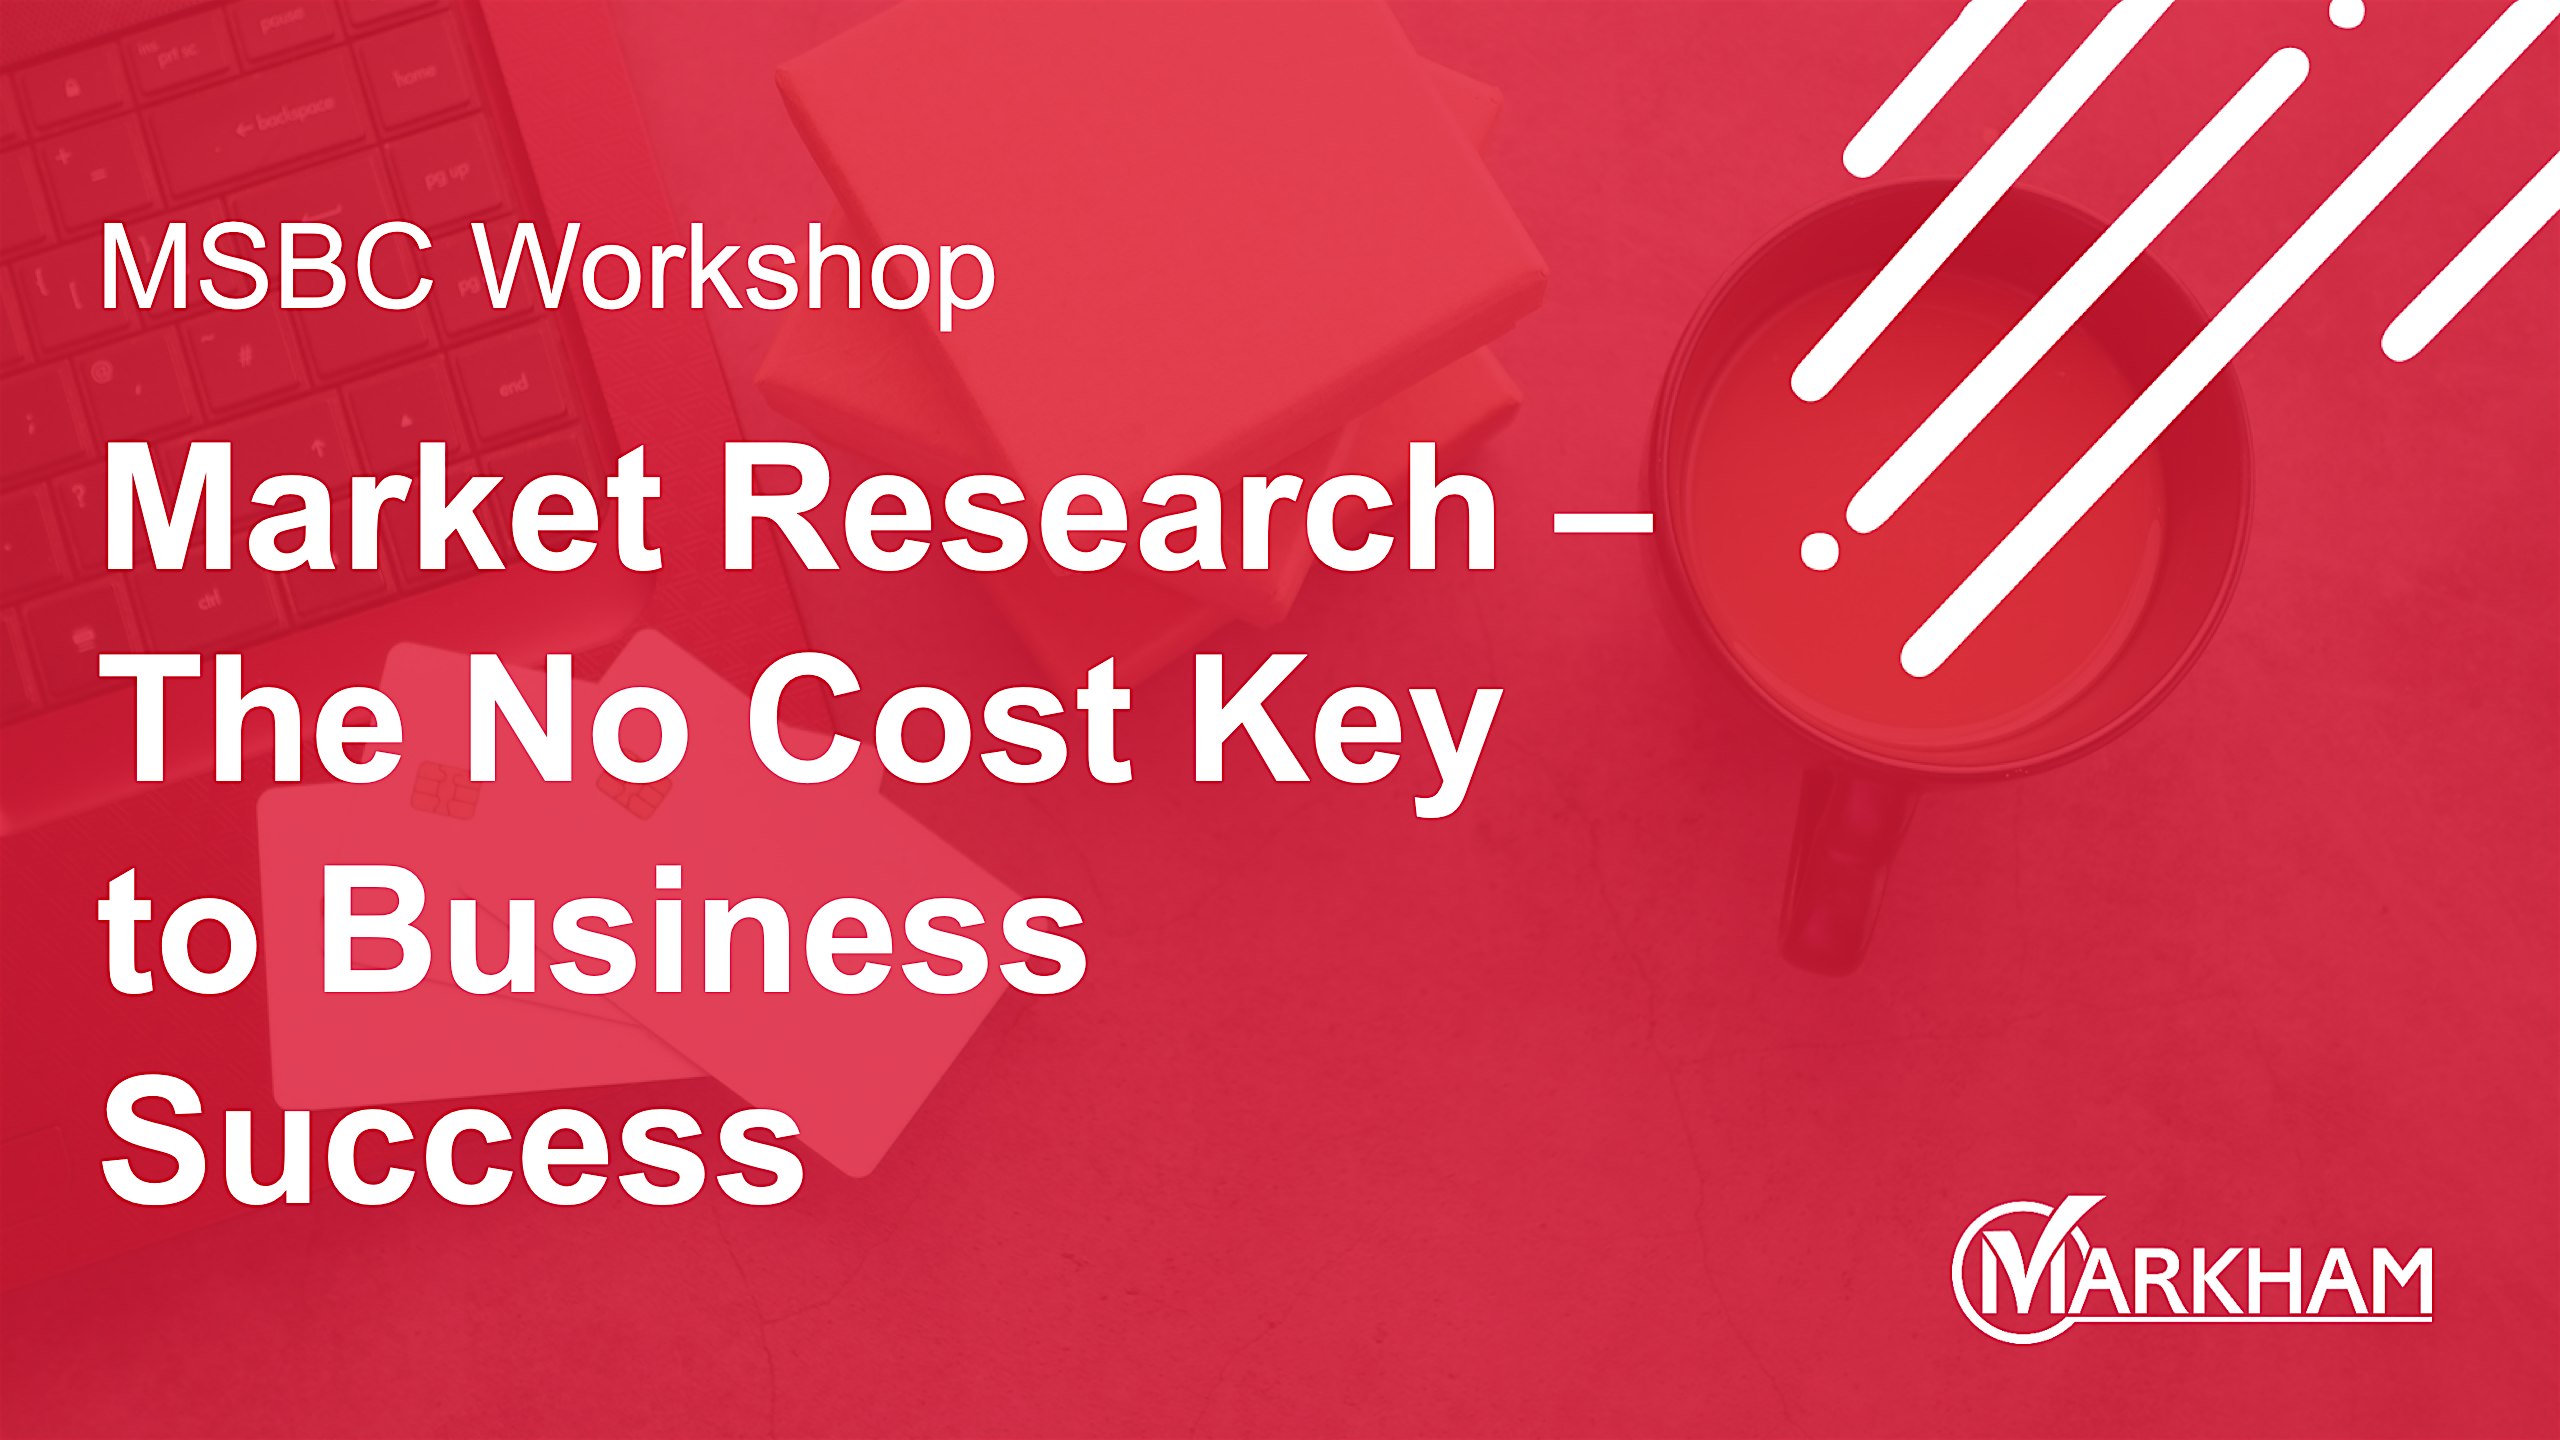 Market Research – The No Cost Key to Business Success